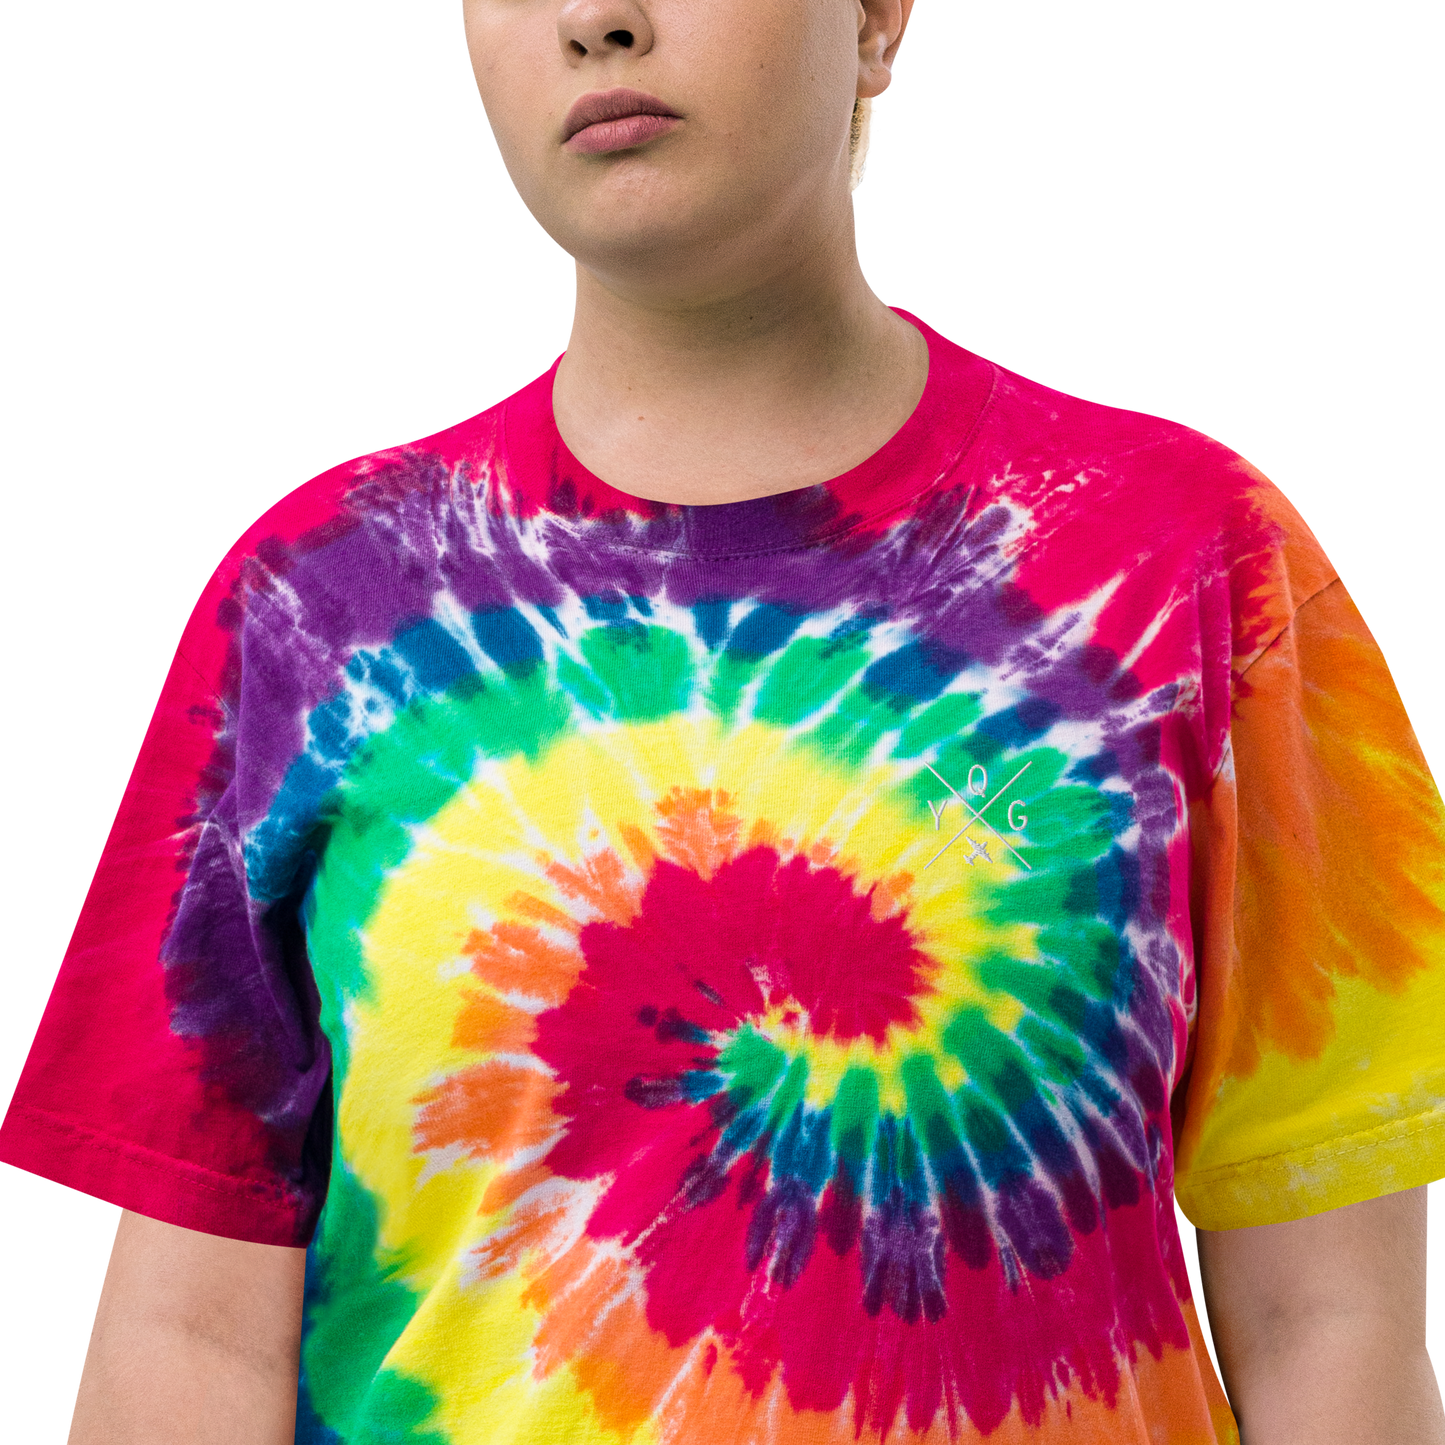 YHM Designs - YQG Windsor Oversized Tie-Dye T-Shirt - Crossed-X Design with Airport Code and Vintage Propliner - White Embroidery - Image 15